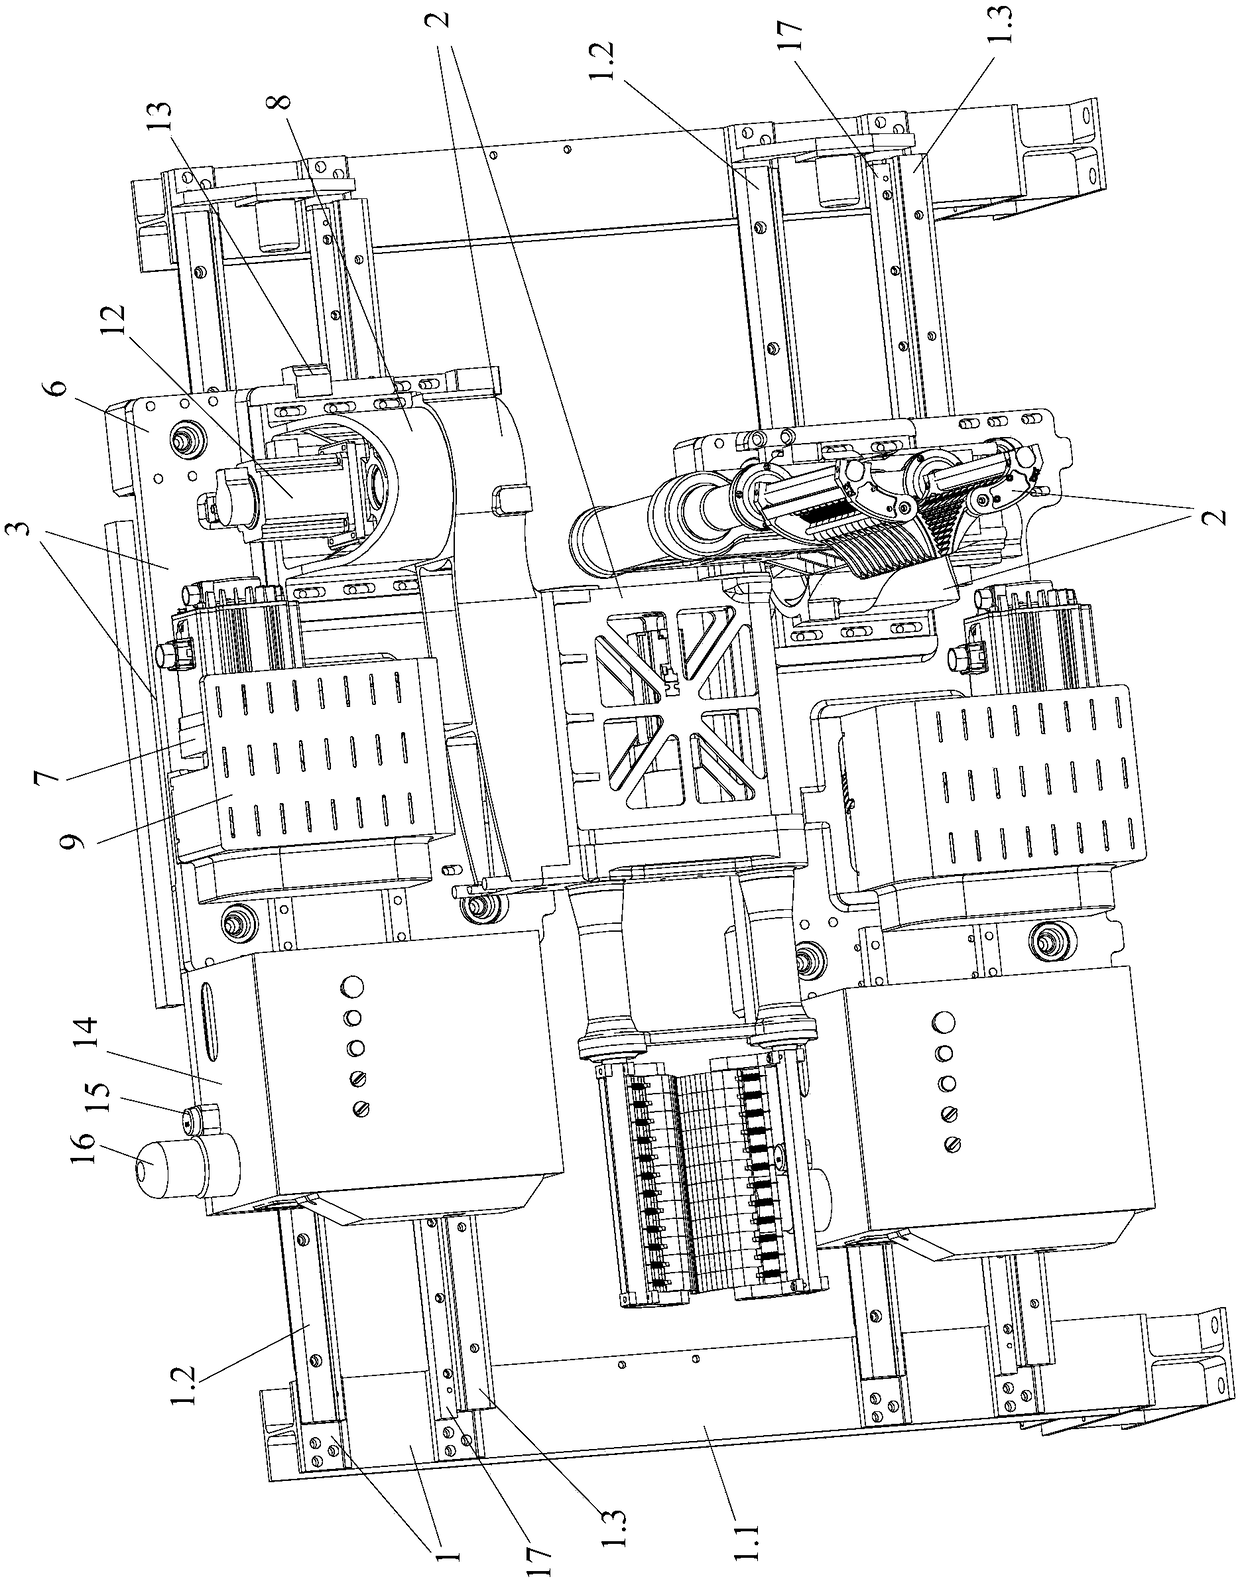 Vertical profile traction robot